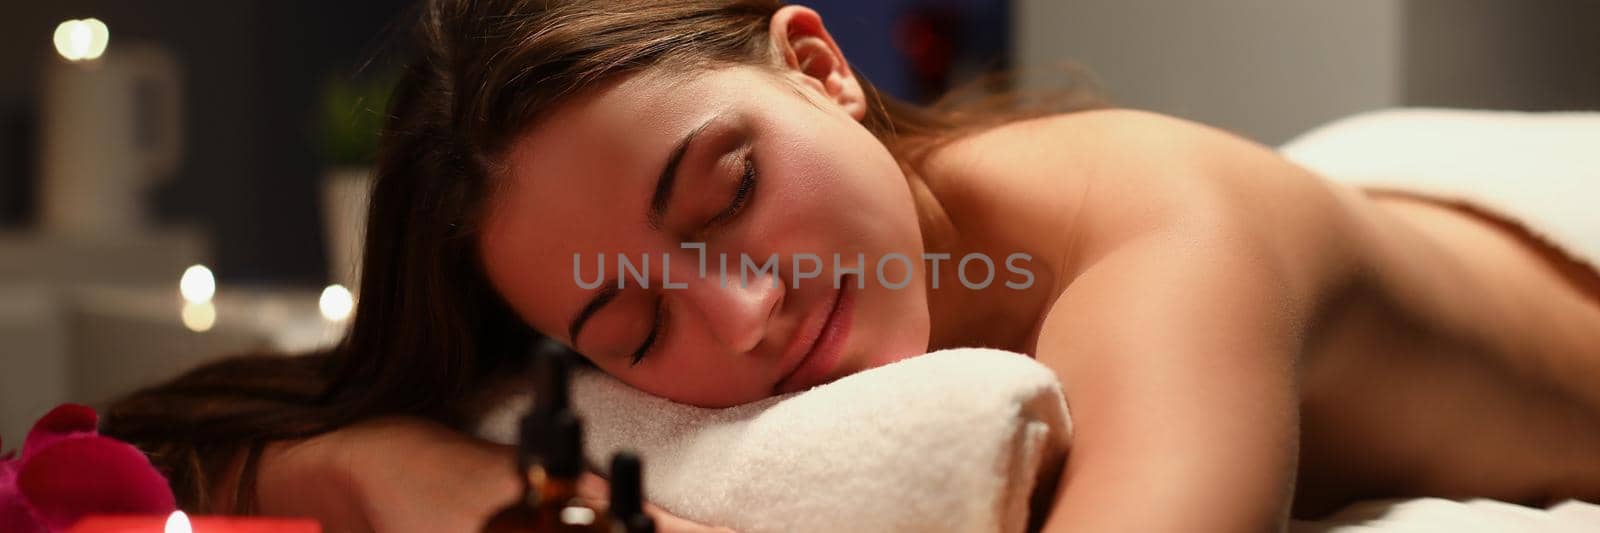 Portrait of young woman laying with closed eyes on massage table in spa. Lady get total relaxation in luxury spa centre. Massage, wellness, care concept